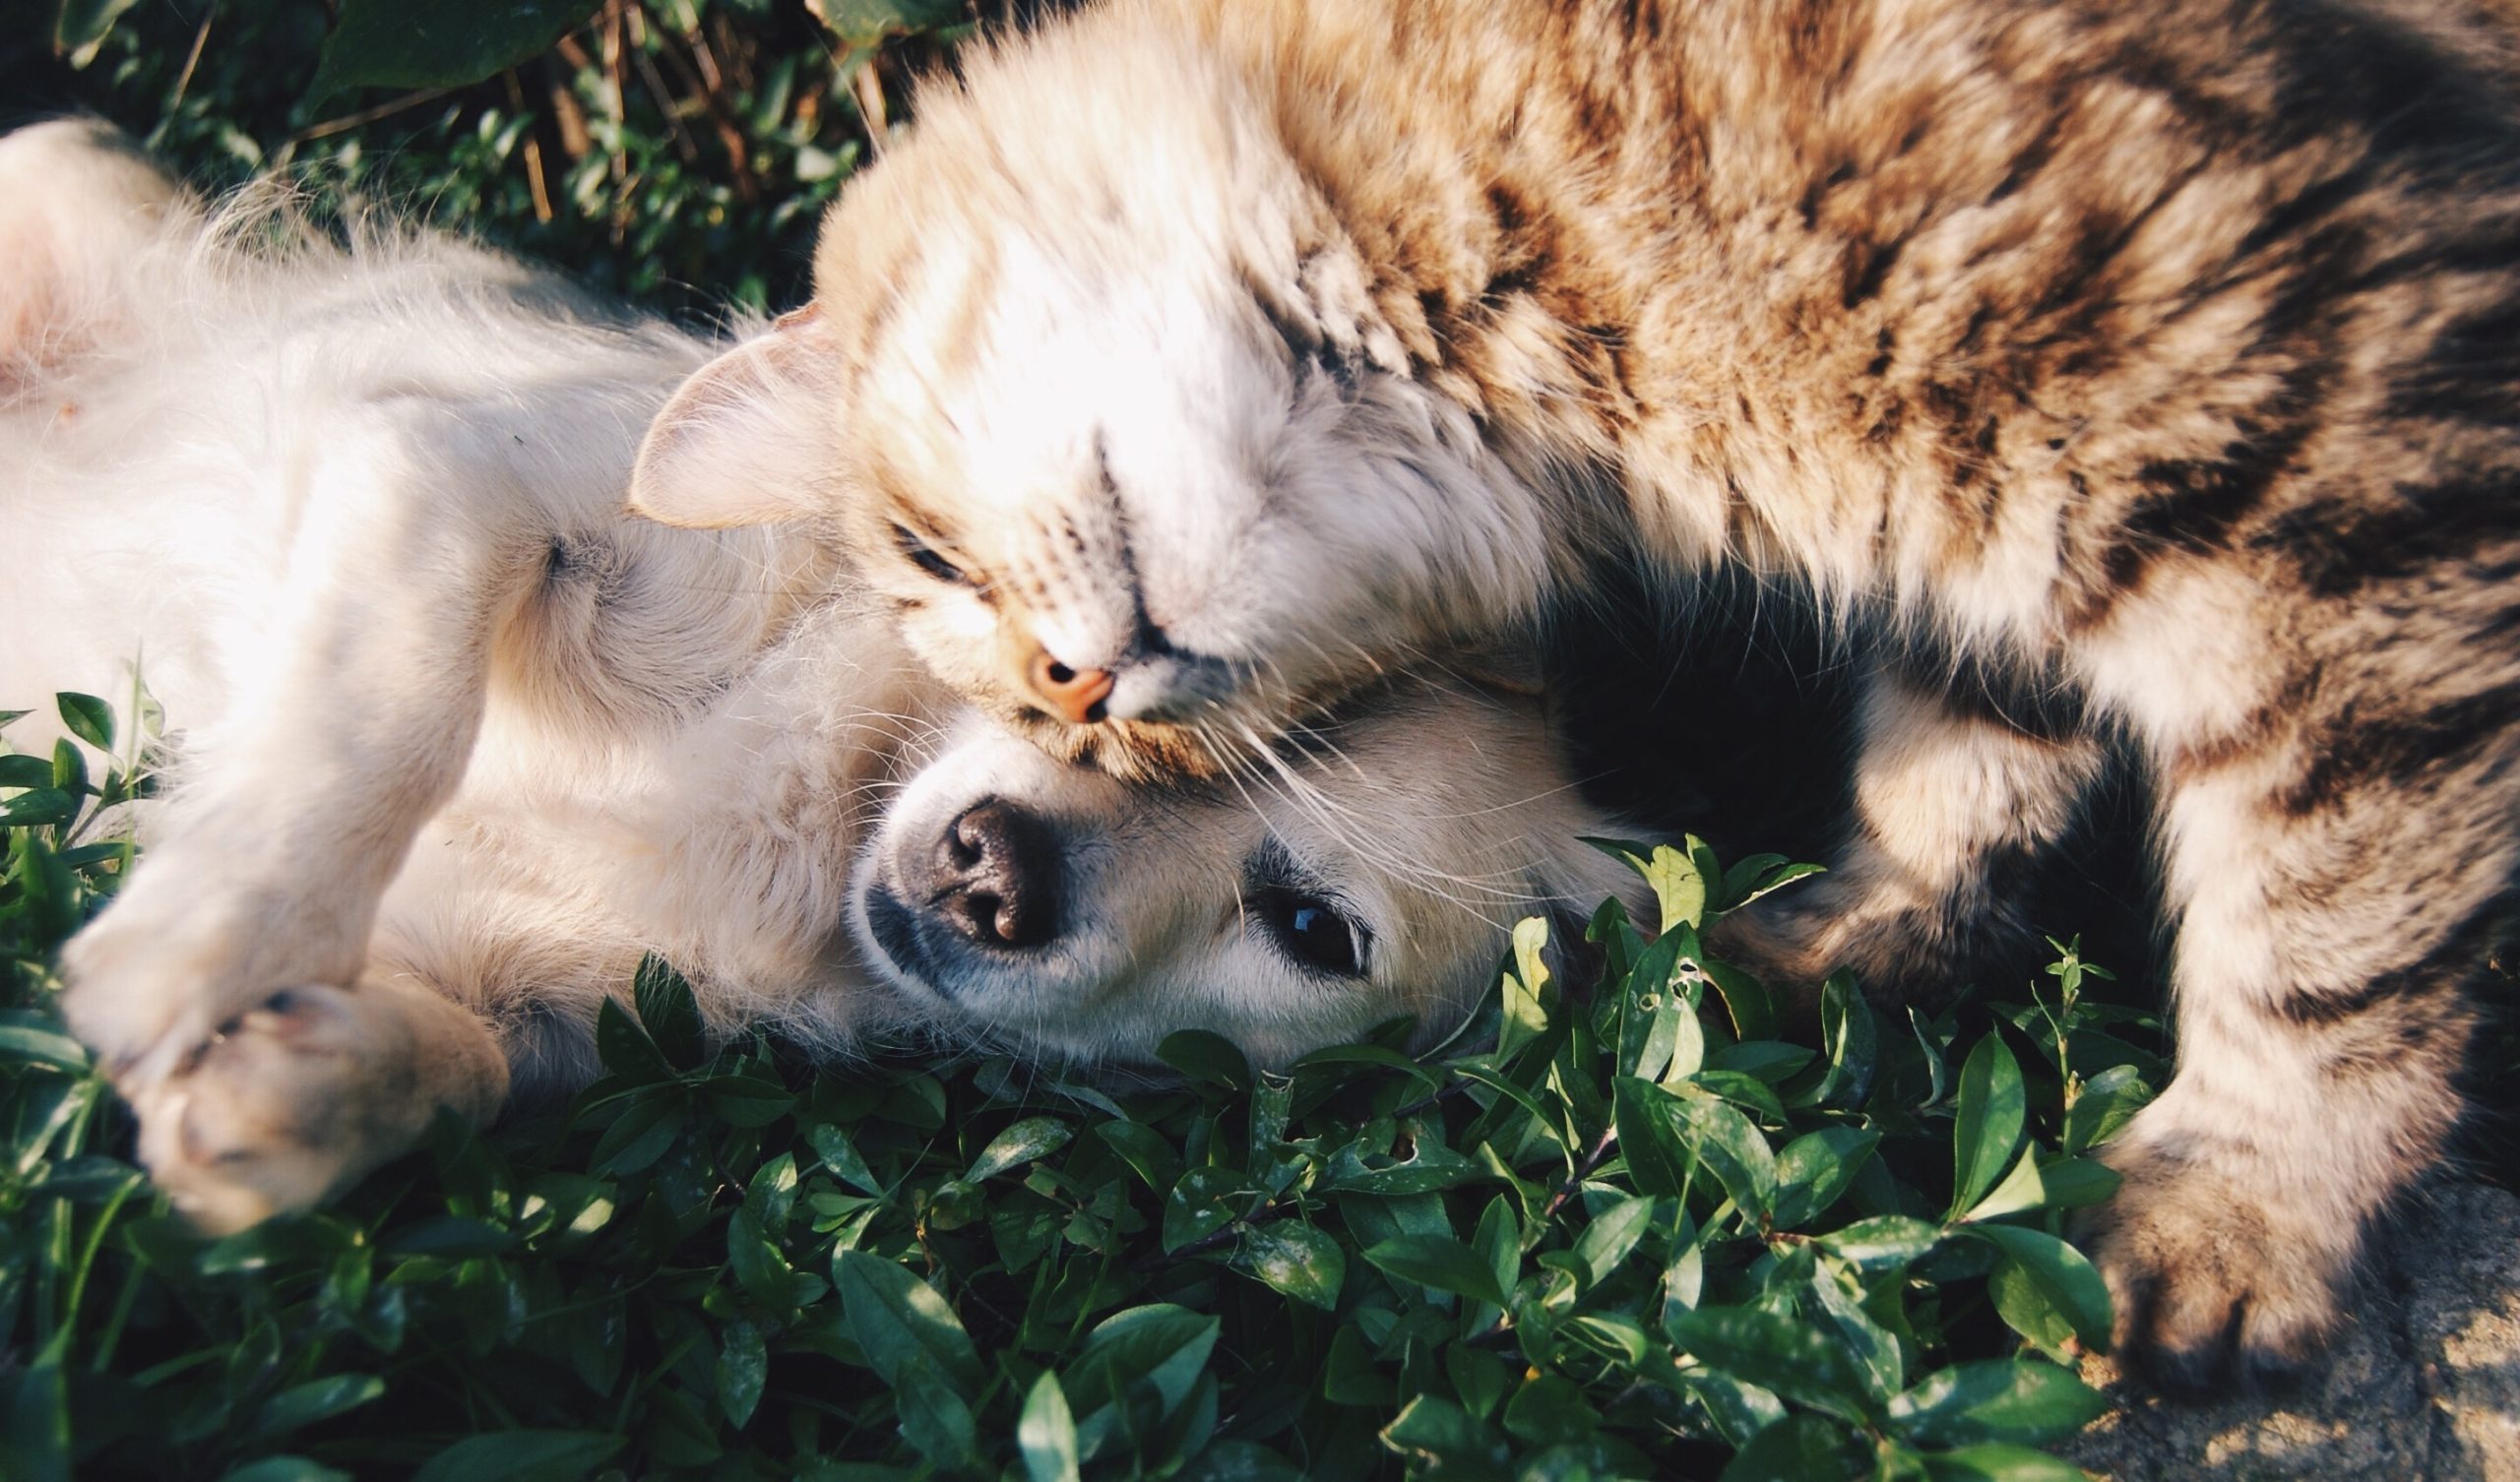 Close Up Of Cat And Puppy Cuddling Together In Grass